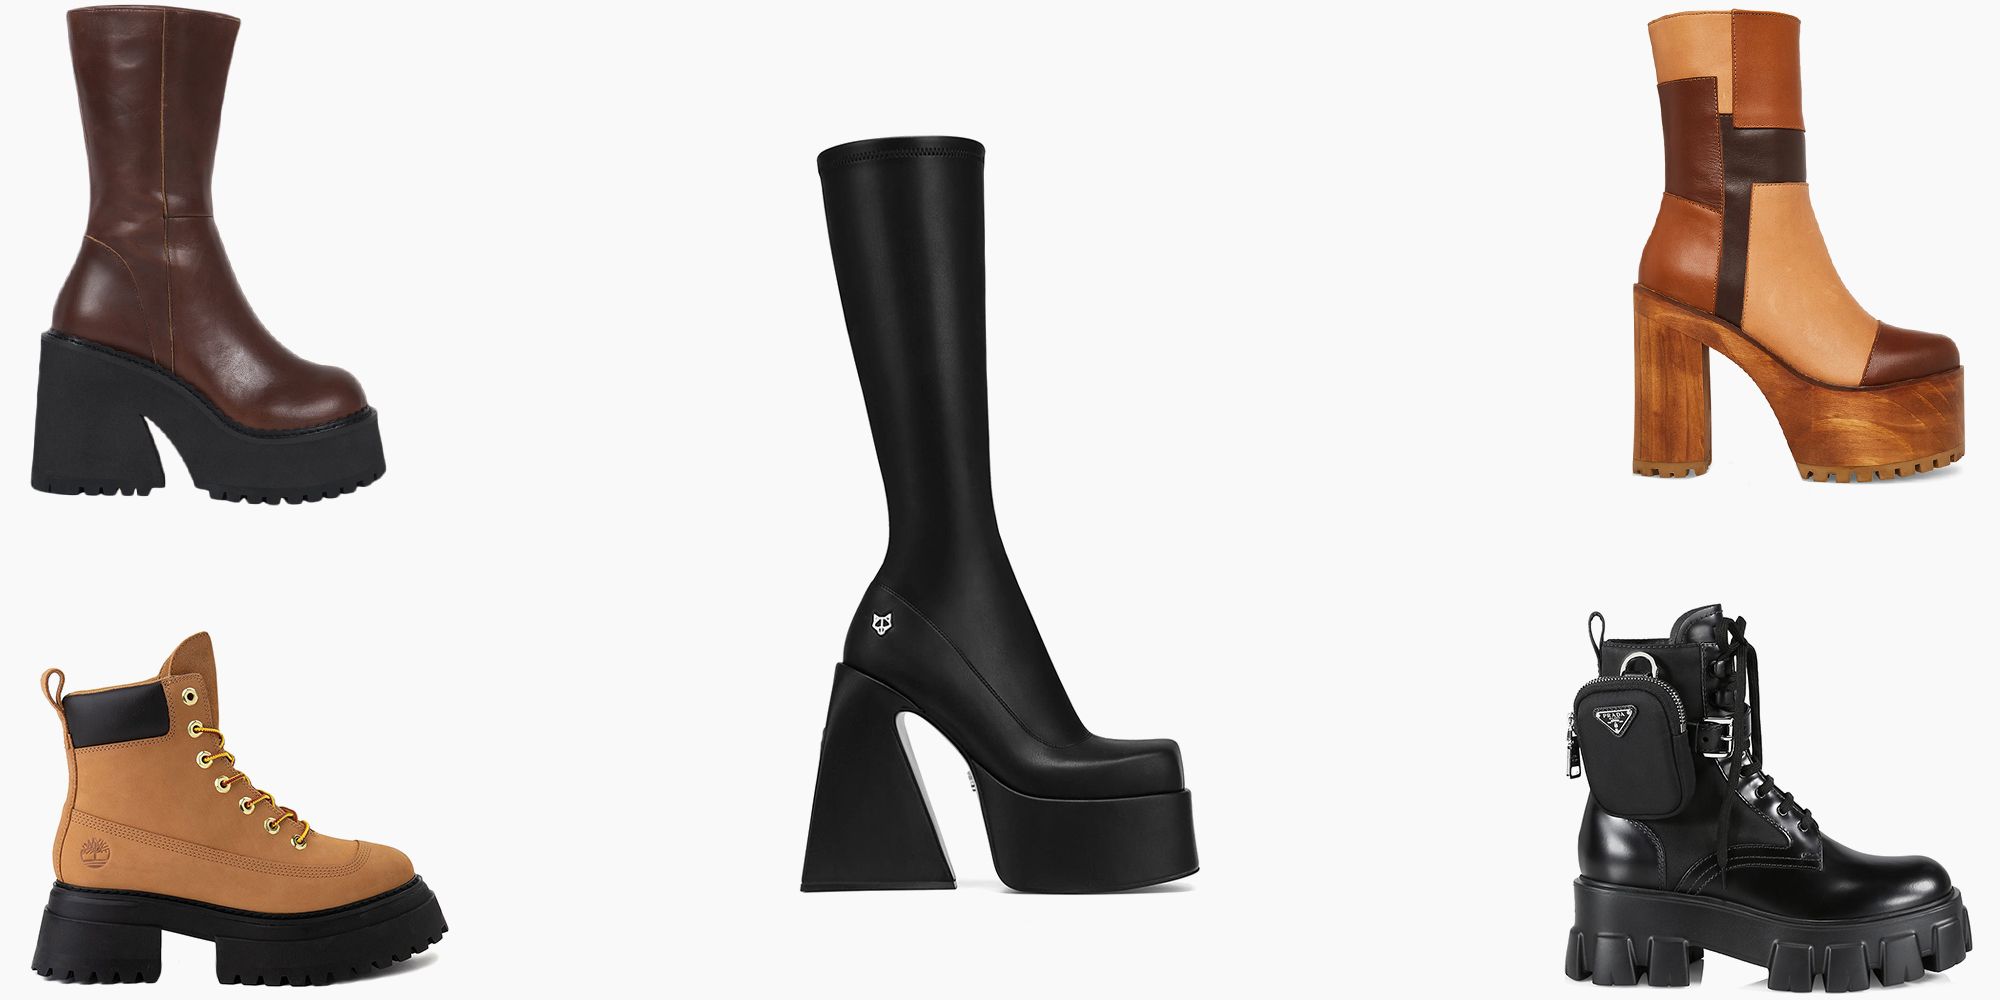 Cute Black High Heel Boots with Lace Detail | Black high heel boots, Heels,  Black high heels